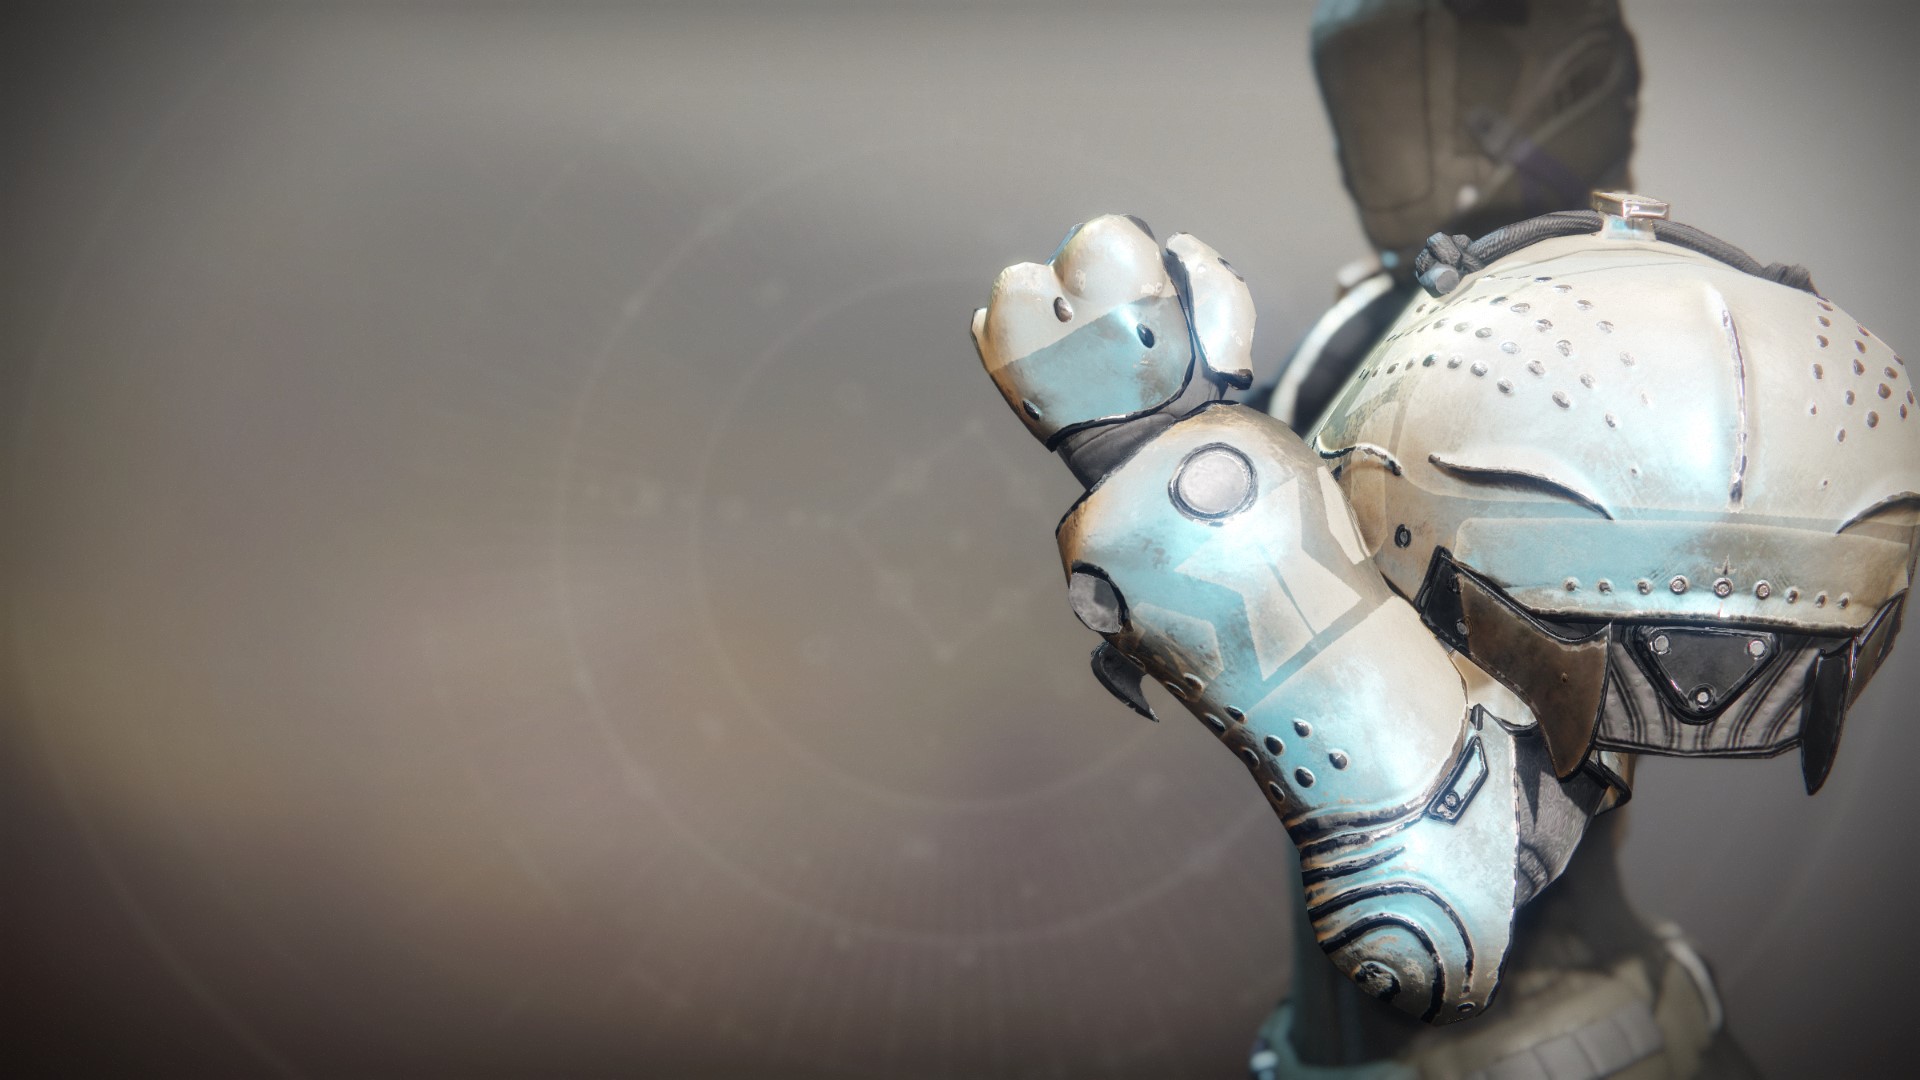 An in-game render of the Eater of Worlds Ornament.